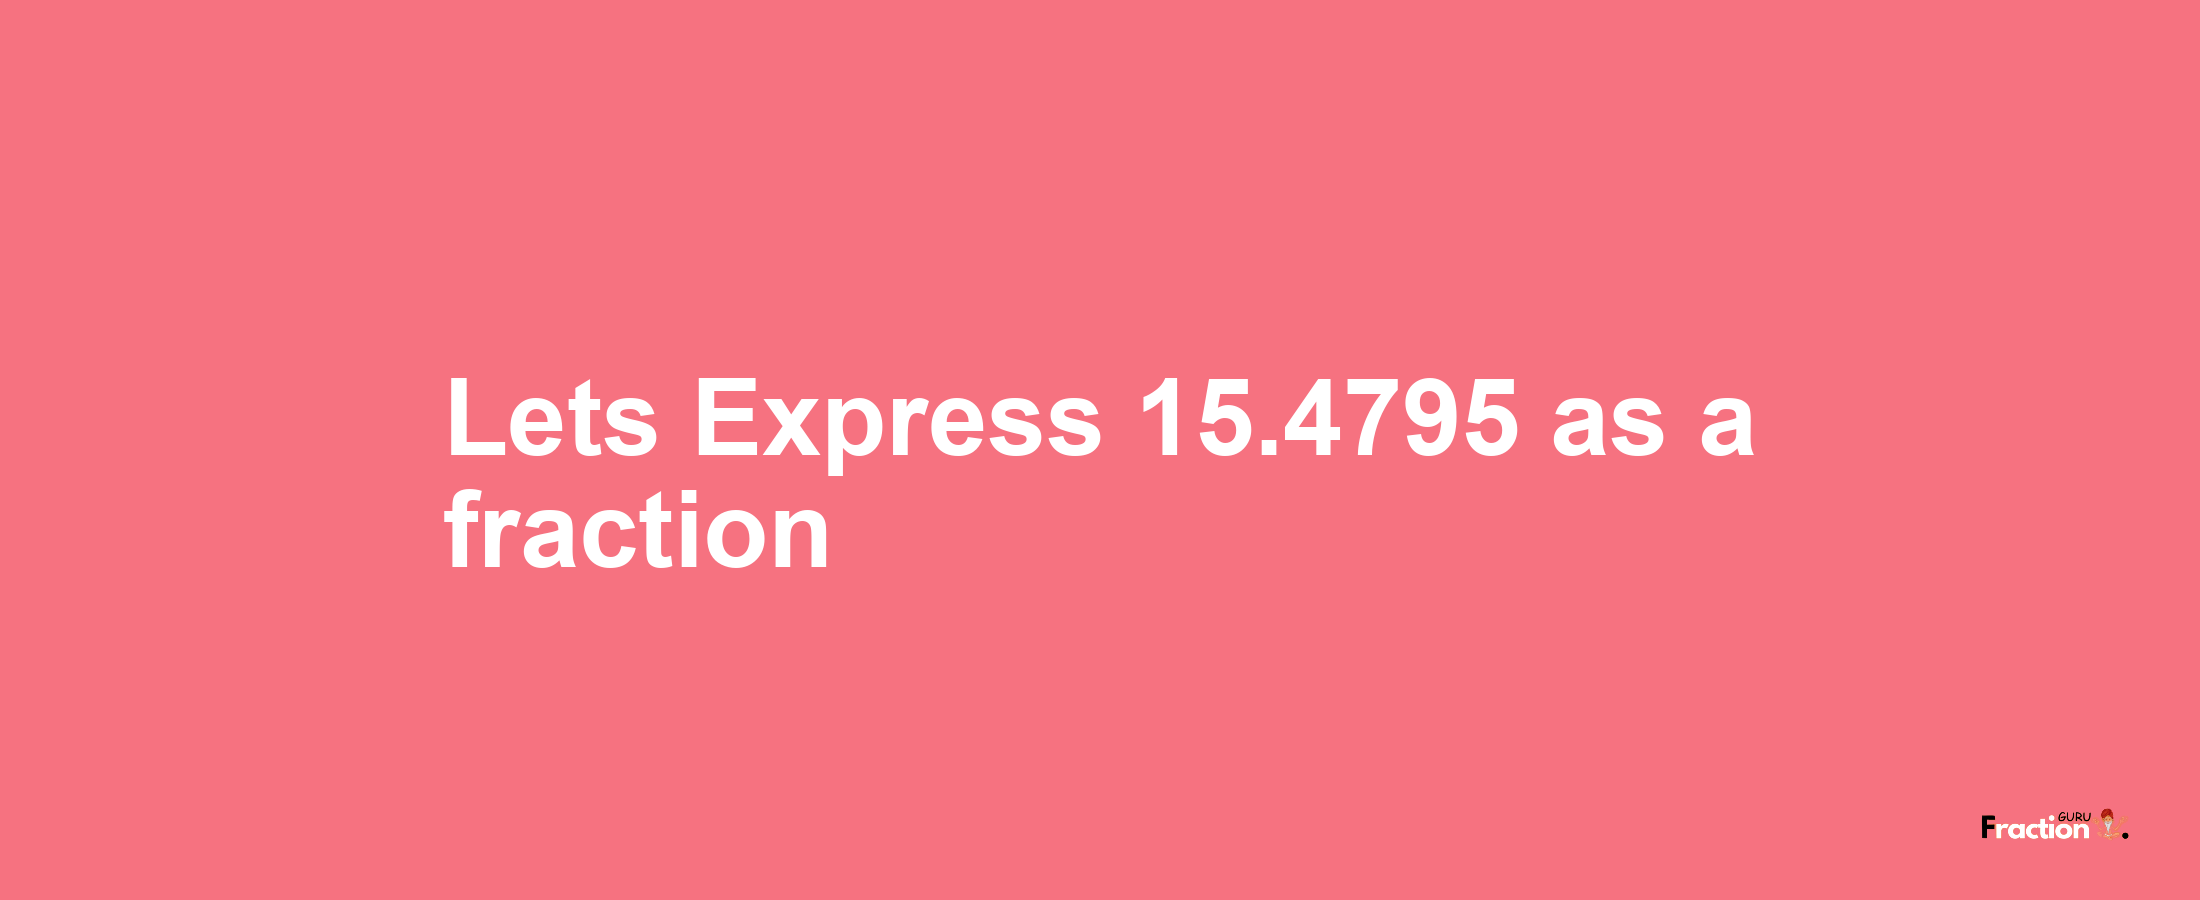 Lets Express 15.4795 as afraction